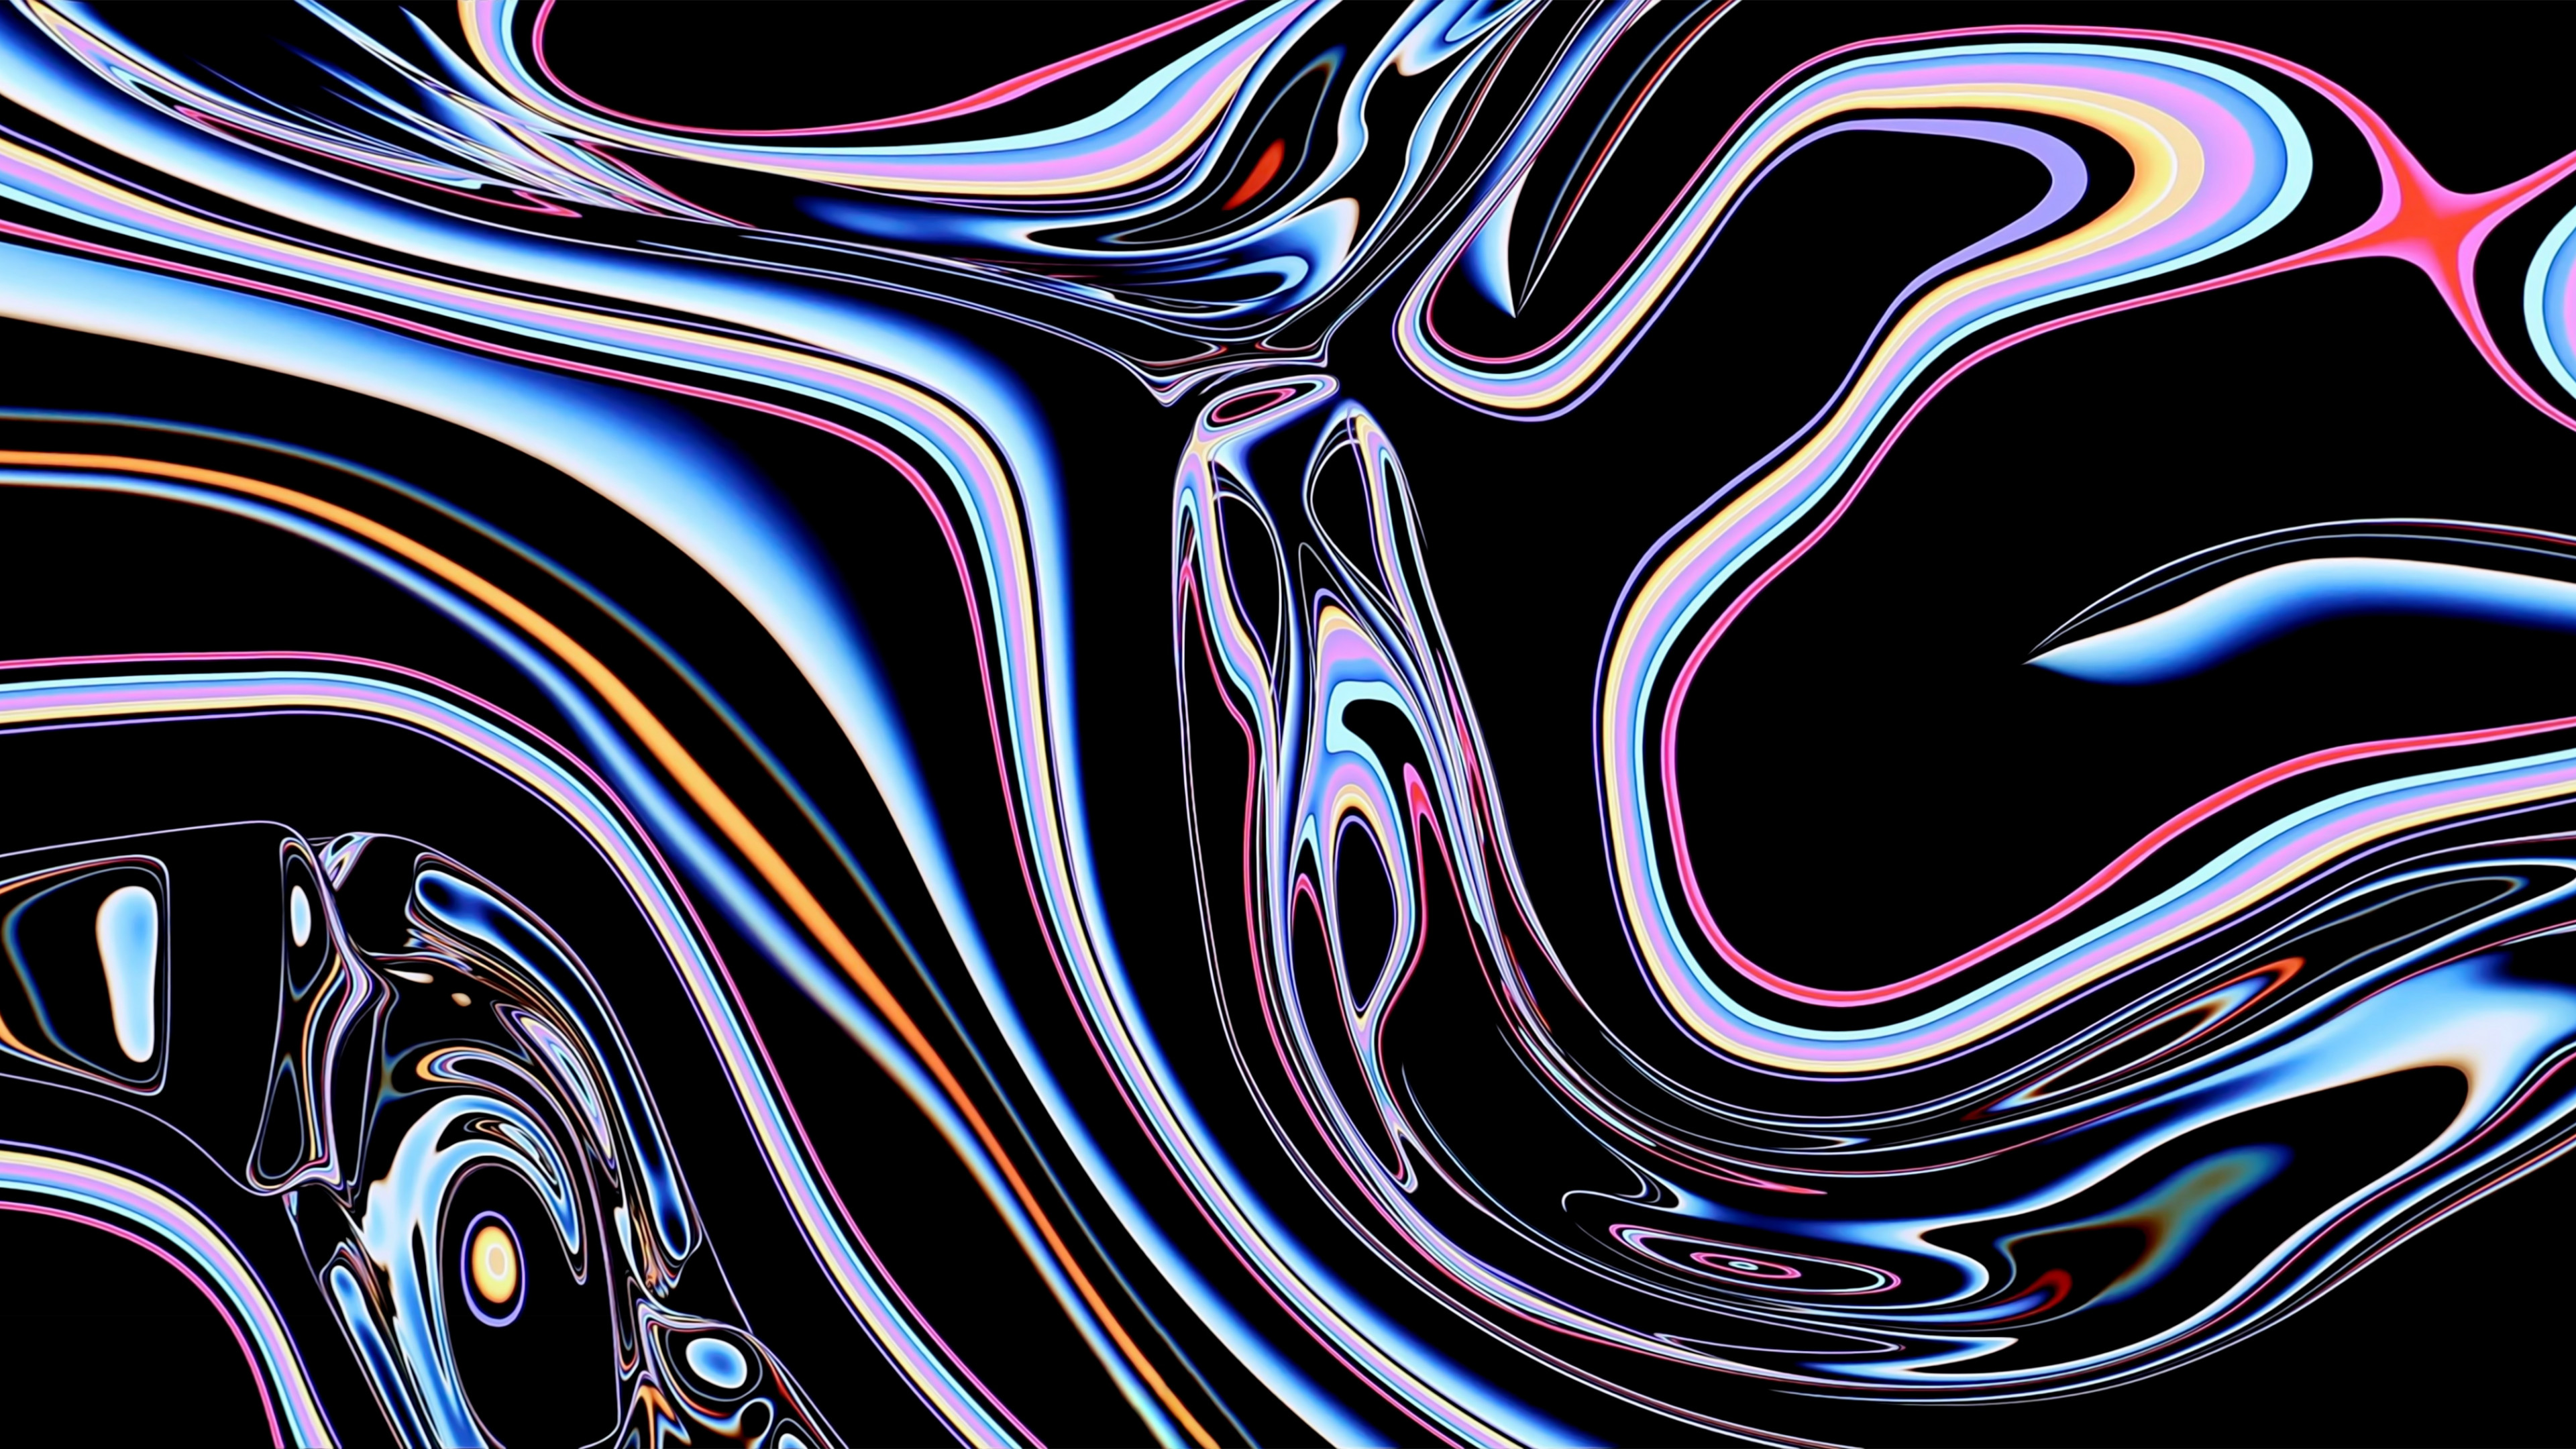 Wallpaper Apple Pro Display Xdr Abstract 4k Wwdc 19 Os